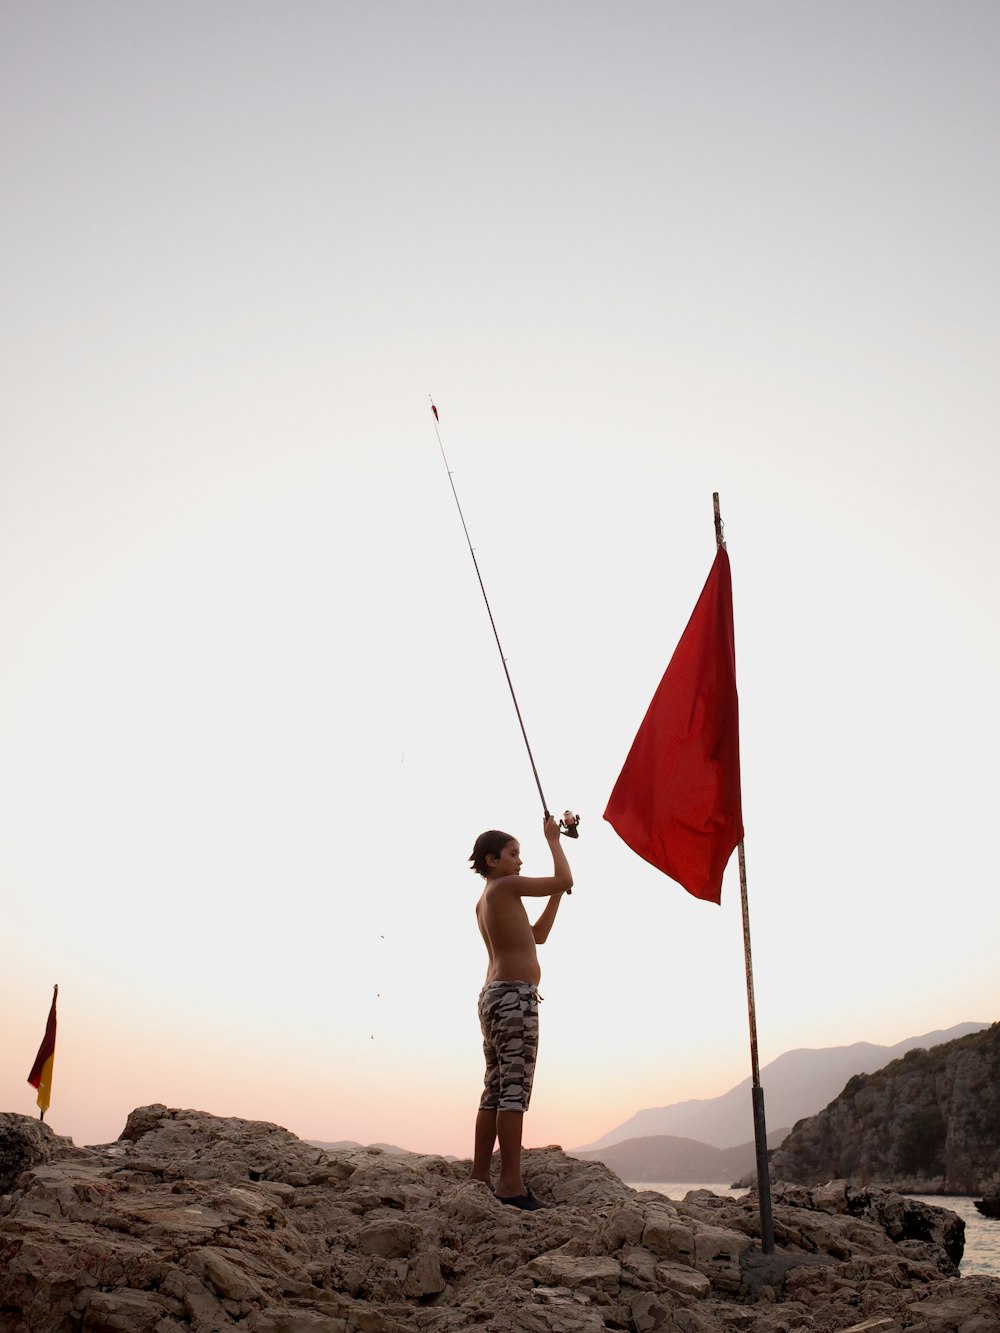 a man holding a red flag on top of a rocky beach